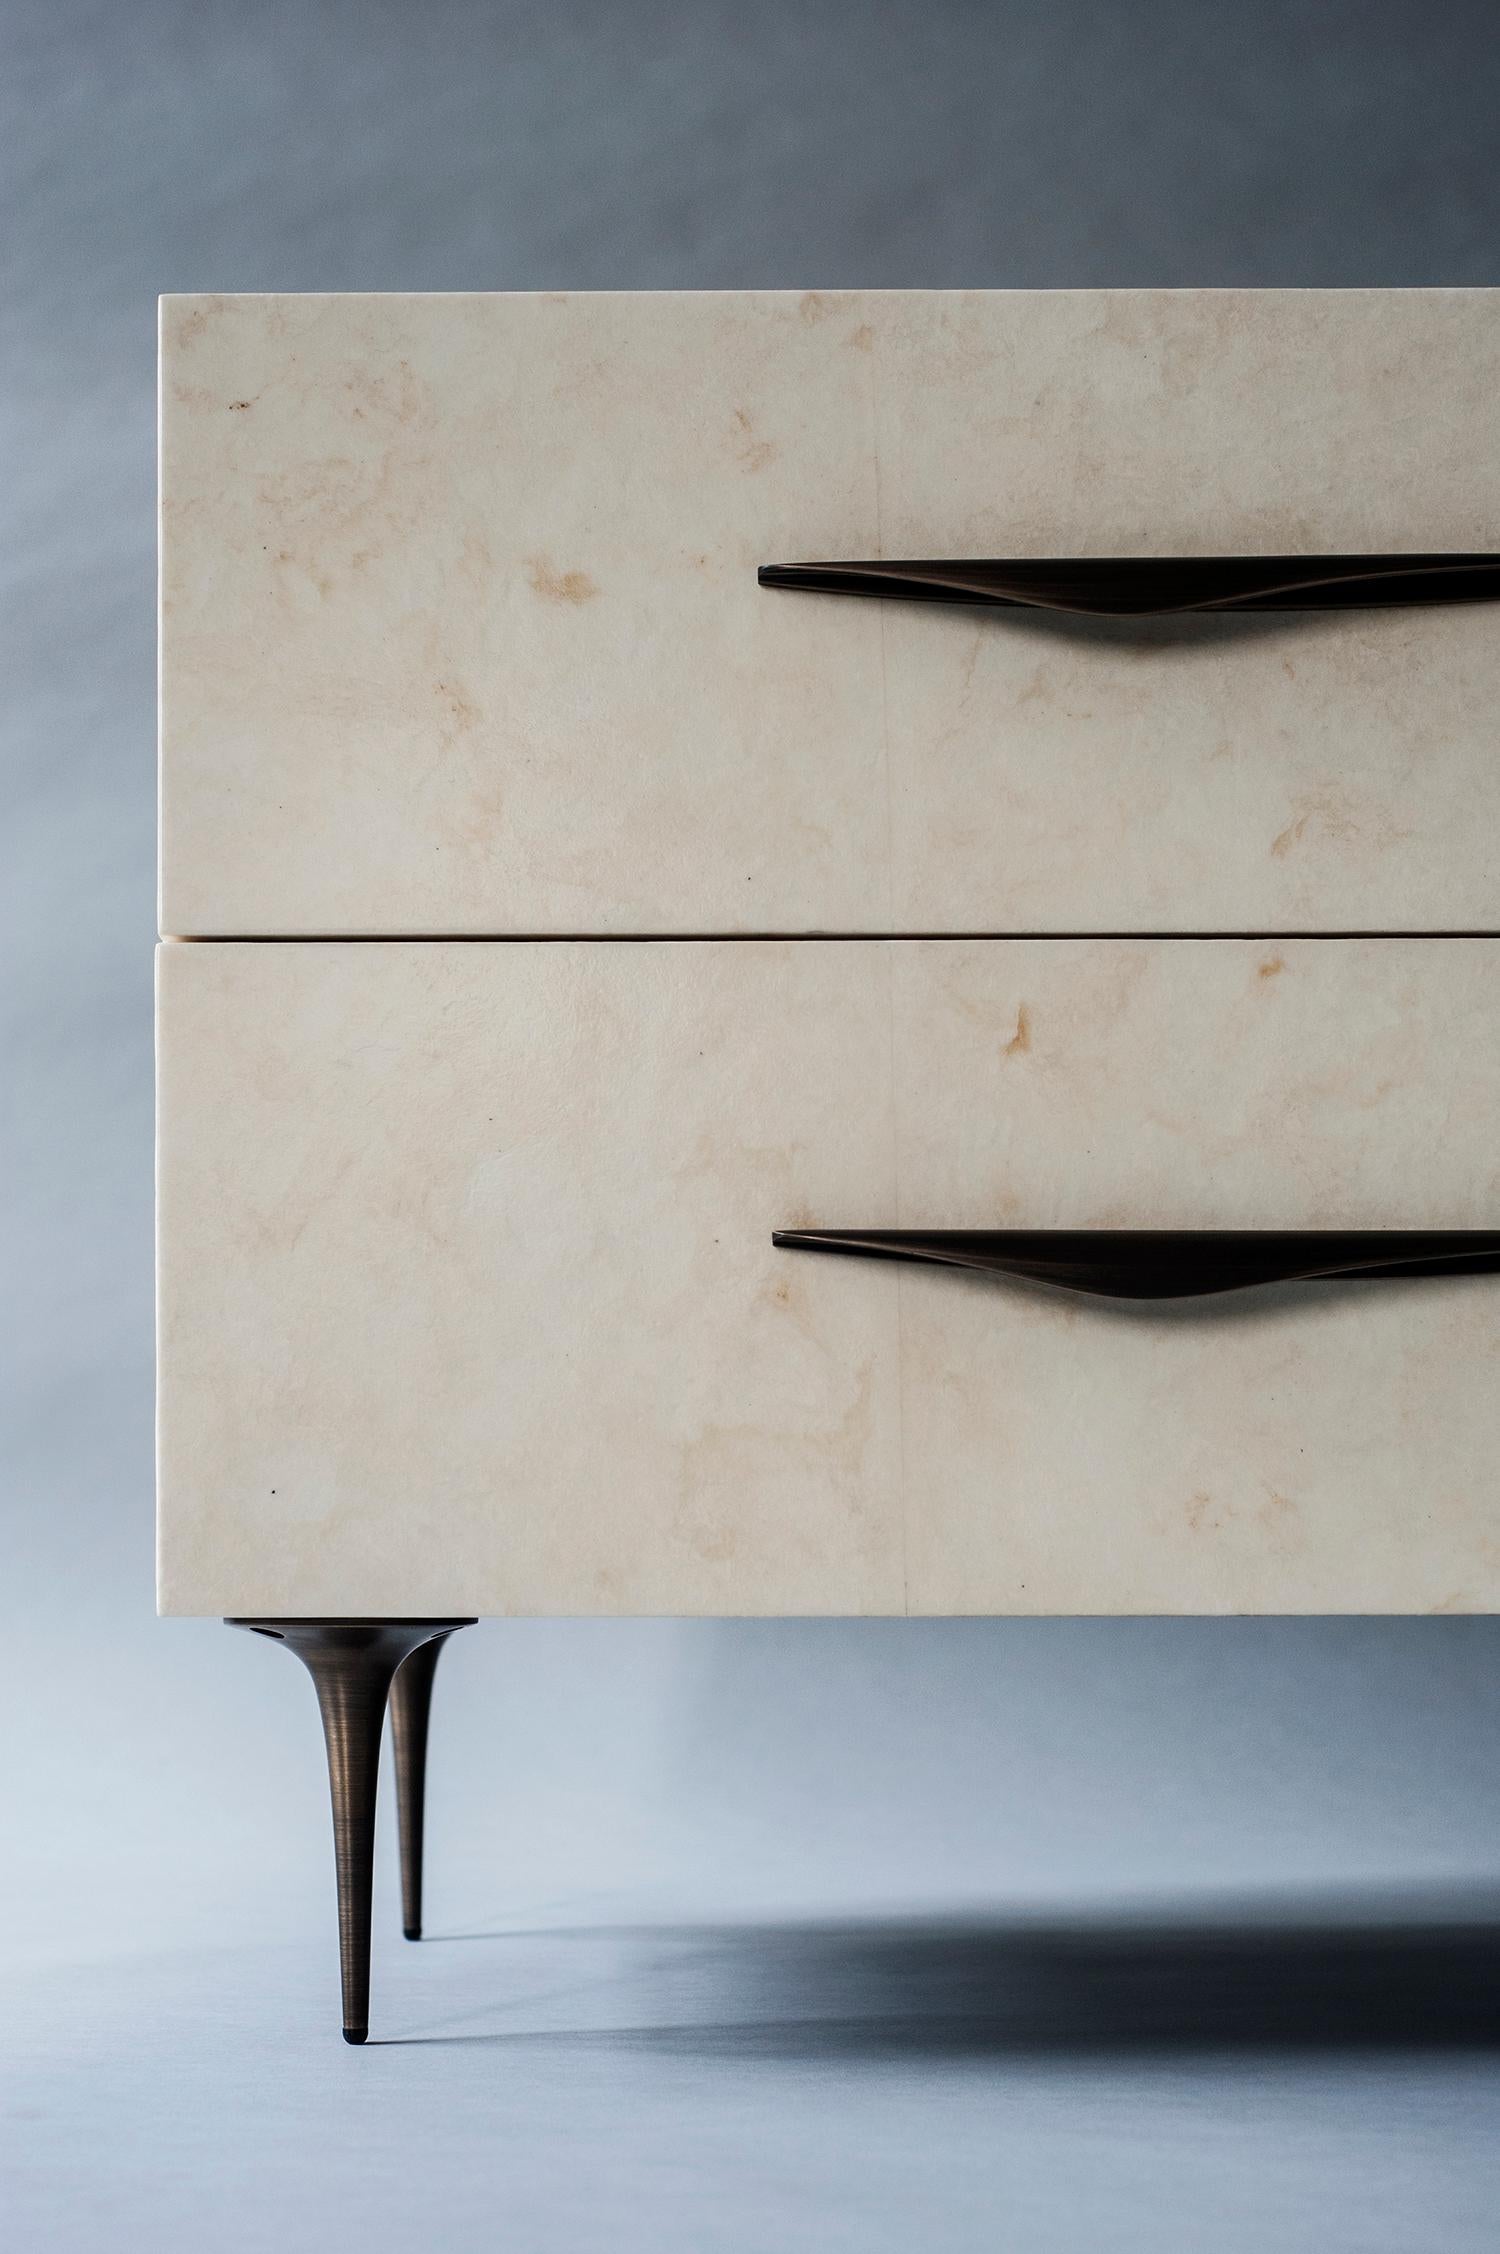 Cast Antwerp Bedside Tables by DeMuro Das with Solid Antique Bronze Handles and Legs For Sale